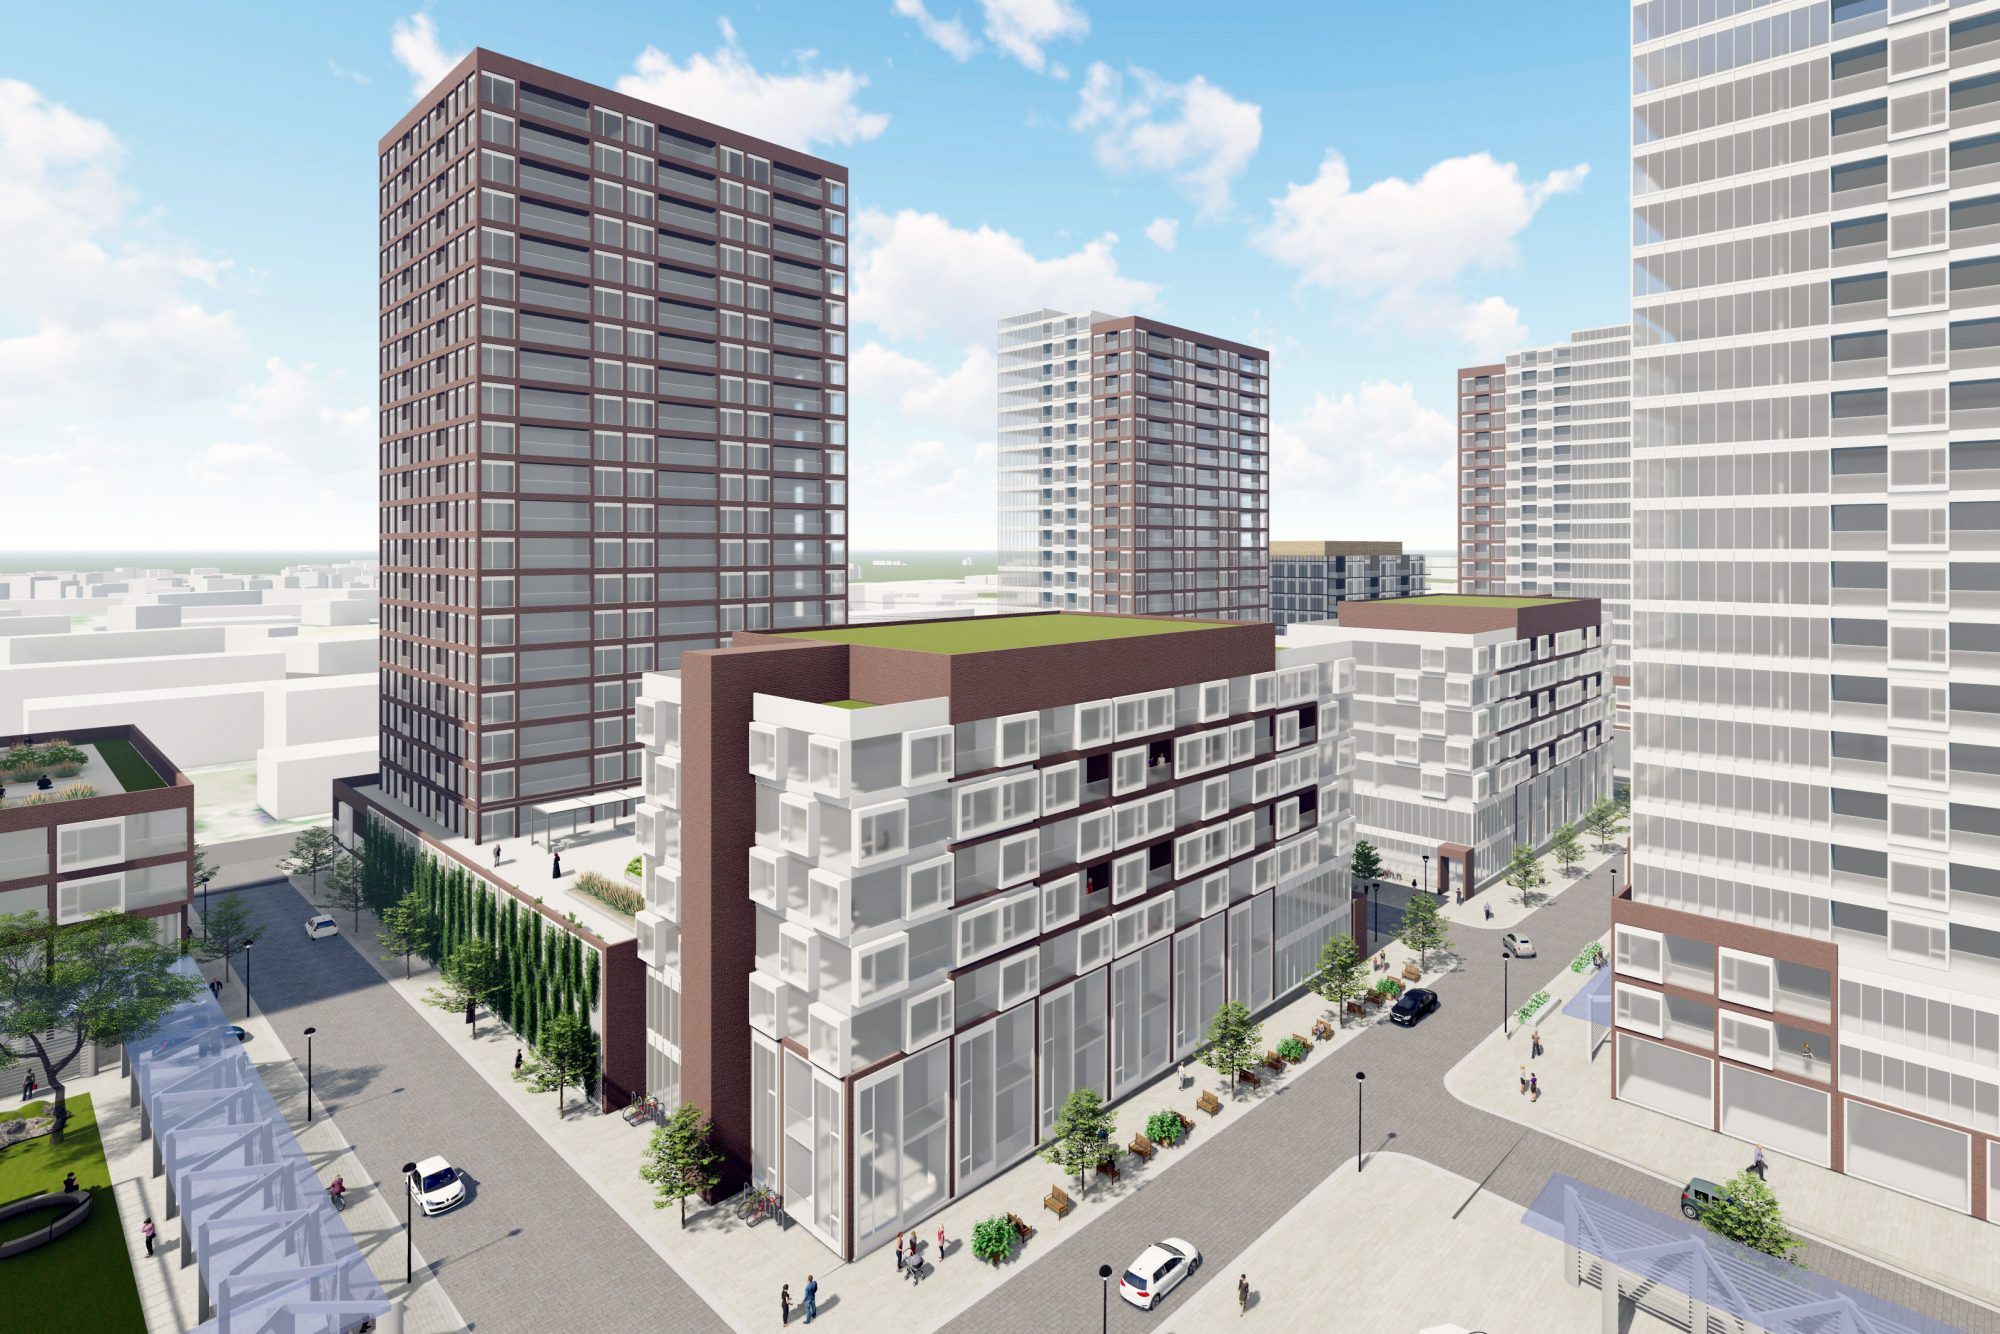 Rendering of a development featuring a variety of buildings and outdoor public spaces.